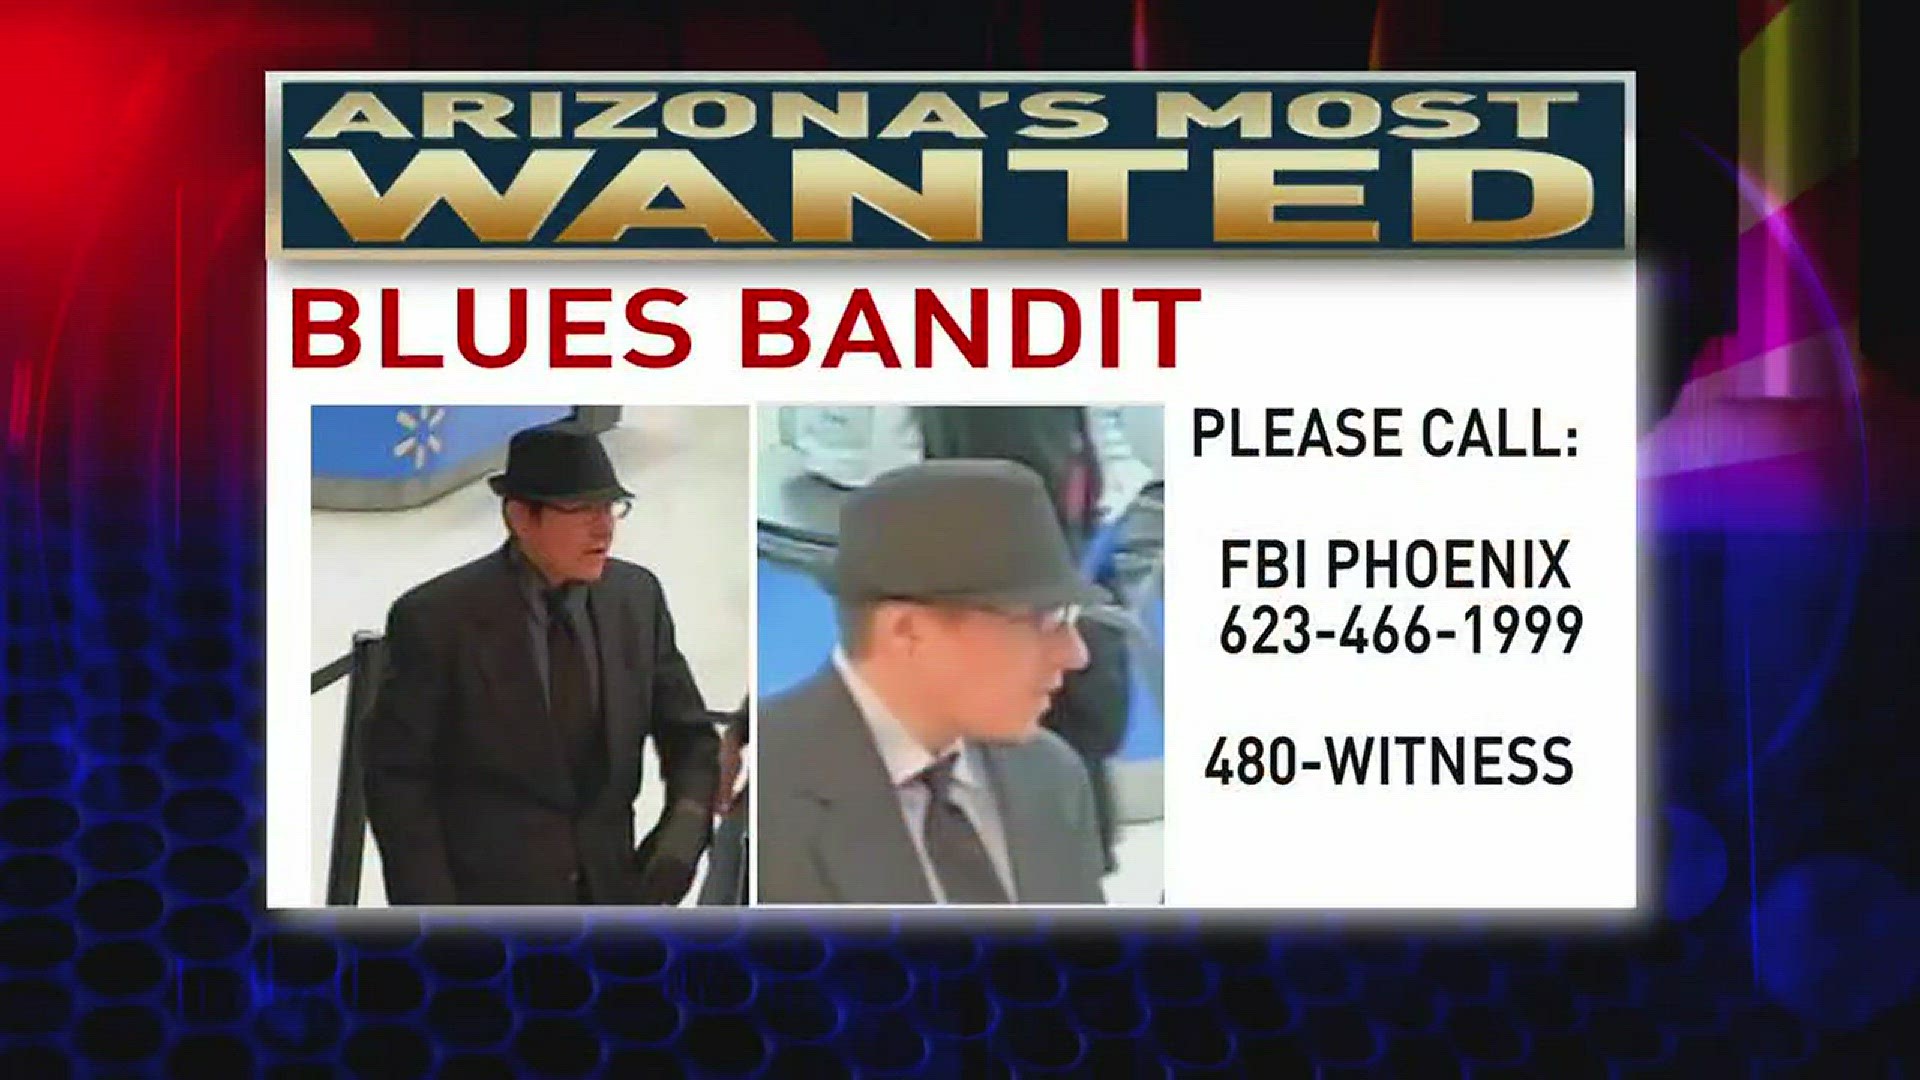 This sharped dress man is a serial bank robber and police need your help to catch him.